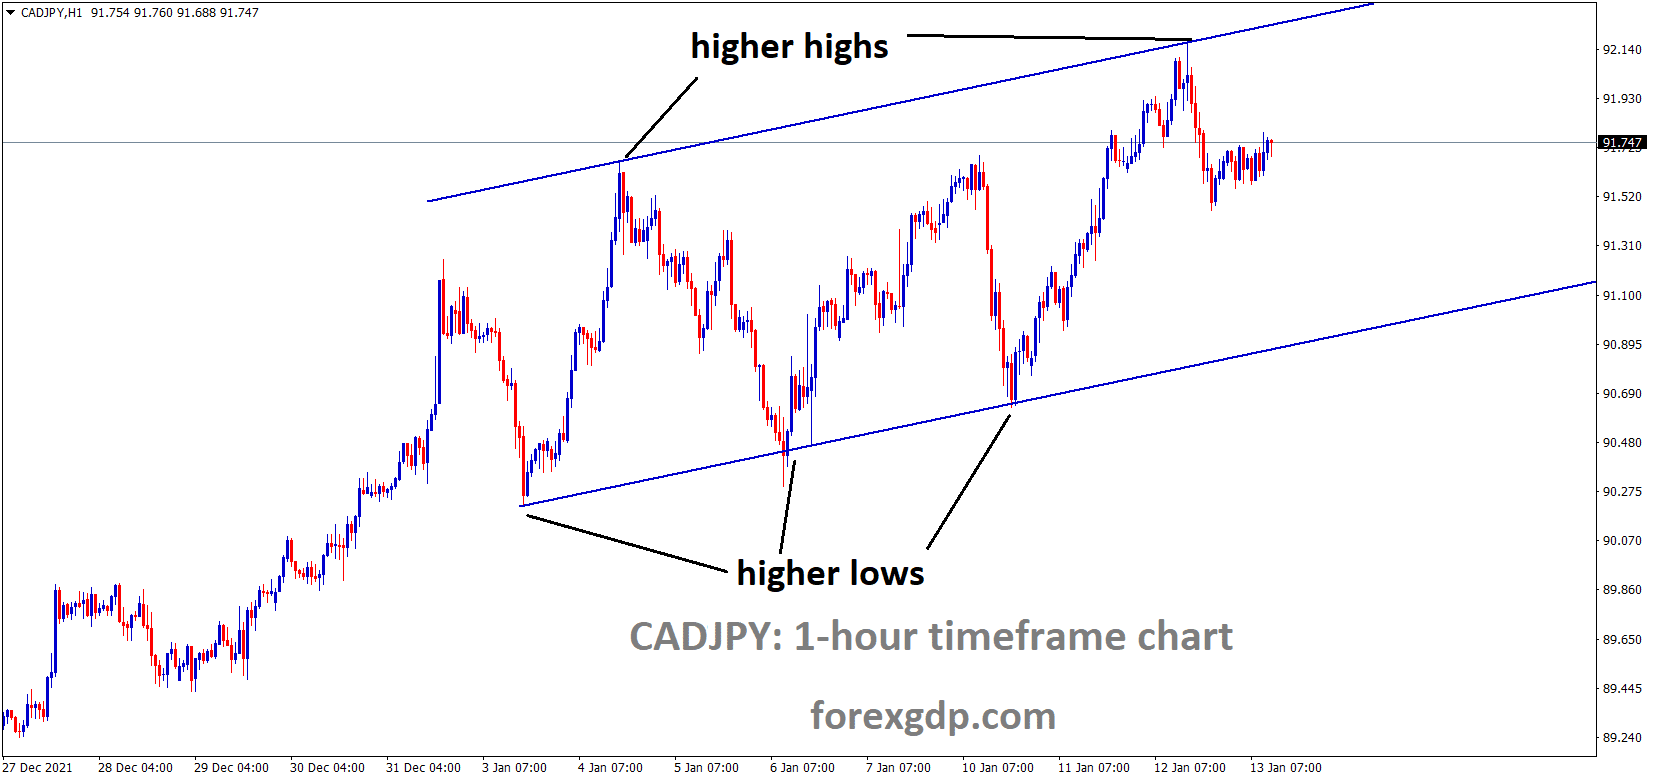 CADJPY is moving in an Ascending channel and the market has fallen from the higher high area of the Channel 1